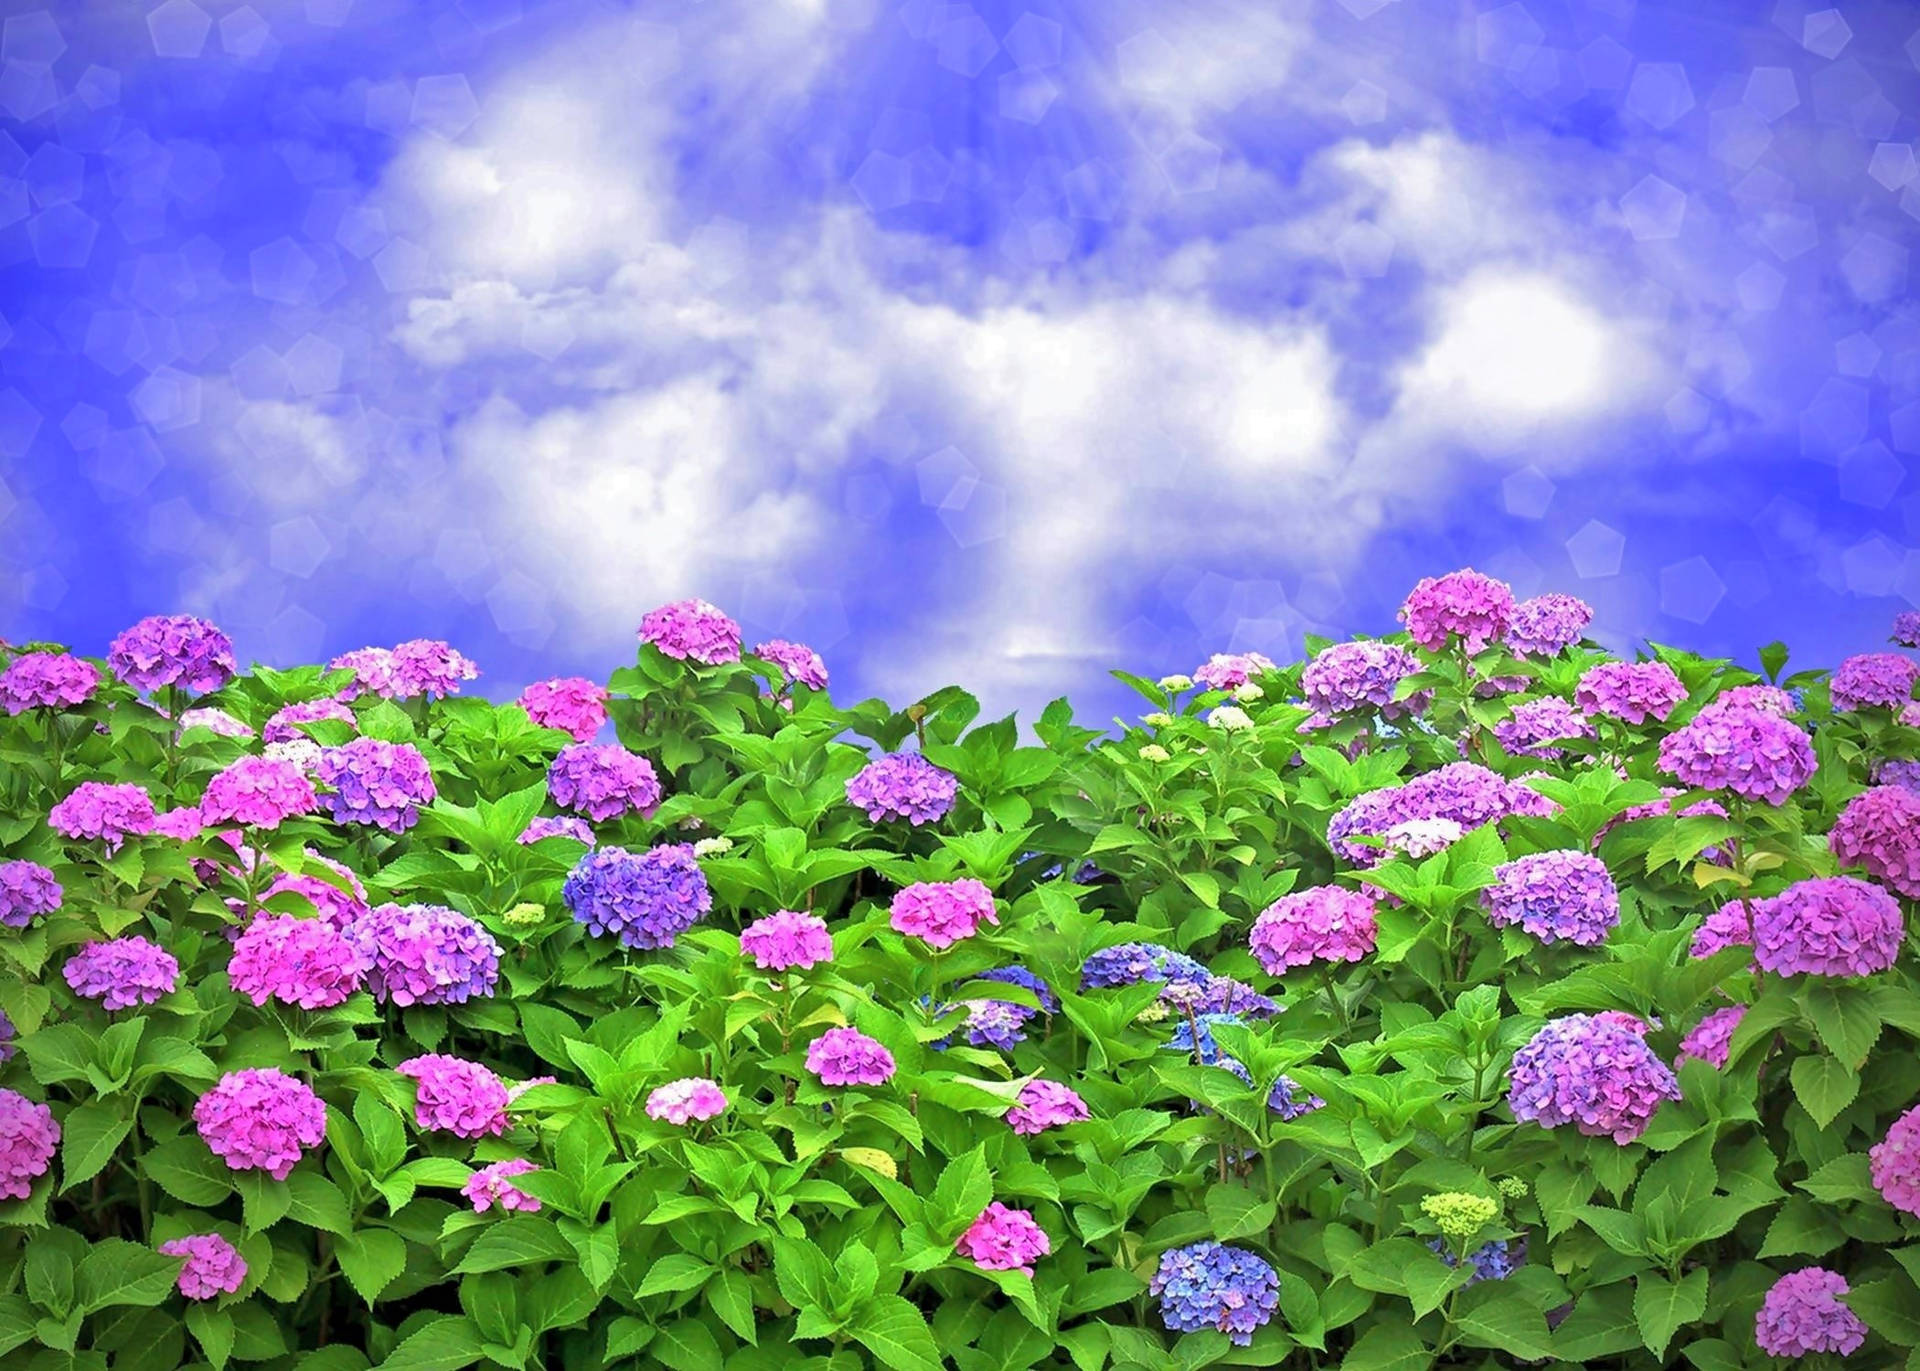 Hydrangea Bushes With Blue Sky Wallpaper